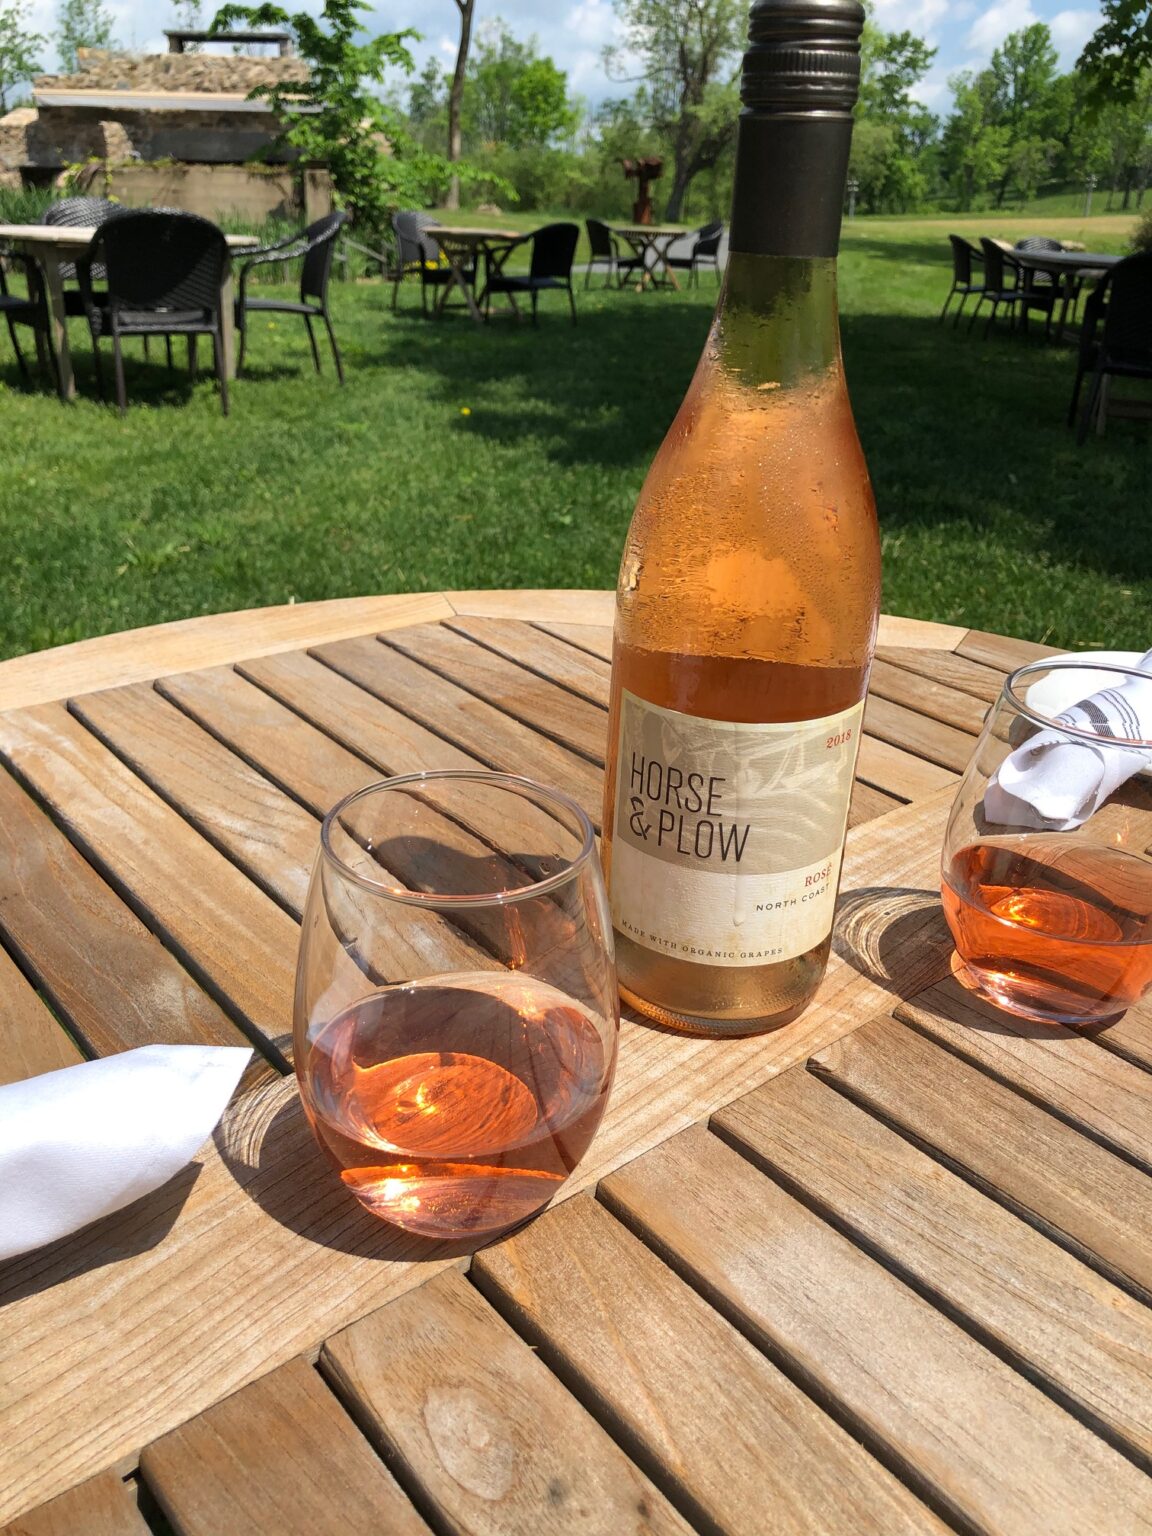 A glass and bottle of rose sit on an outdoor wooden table.